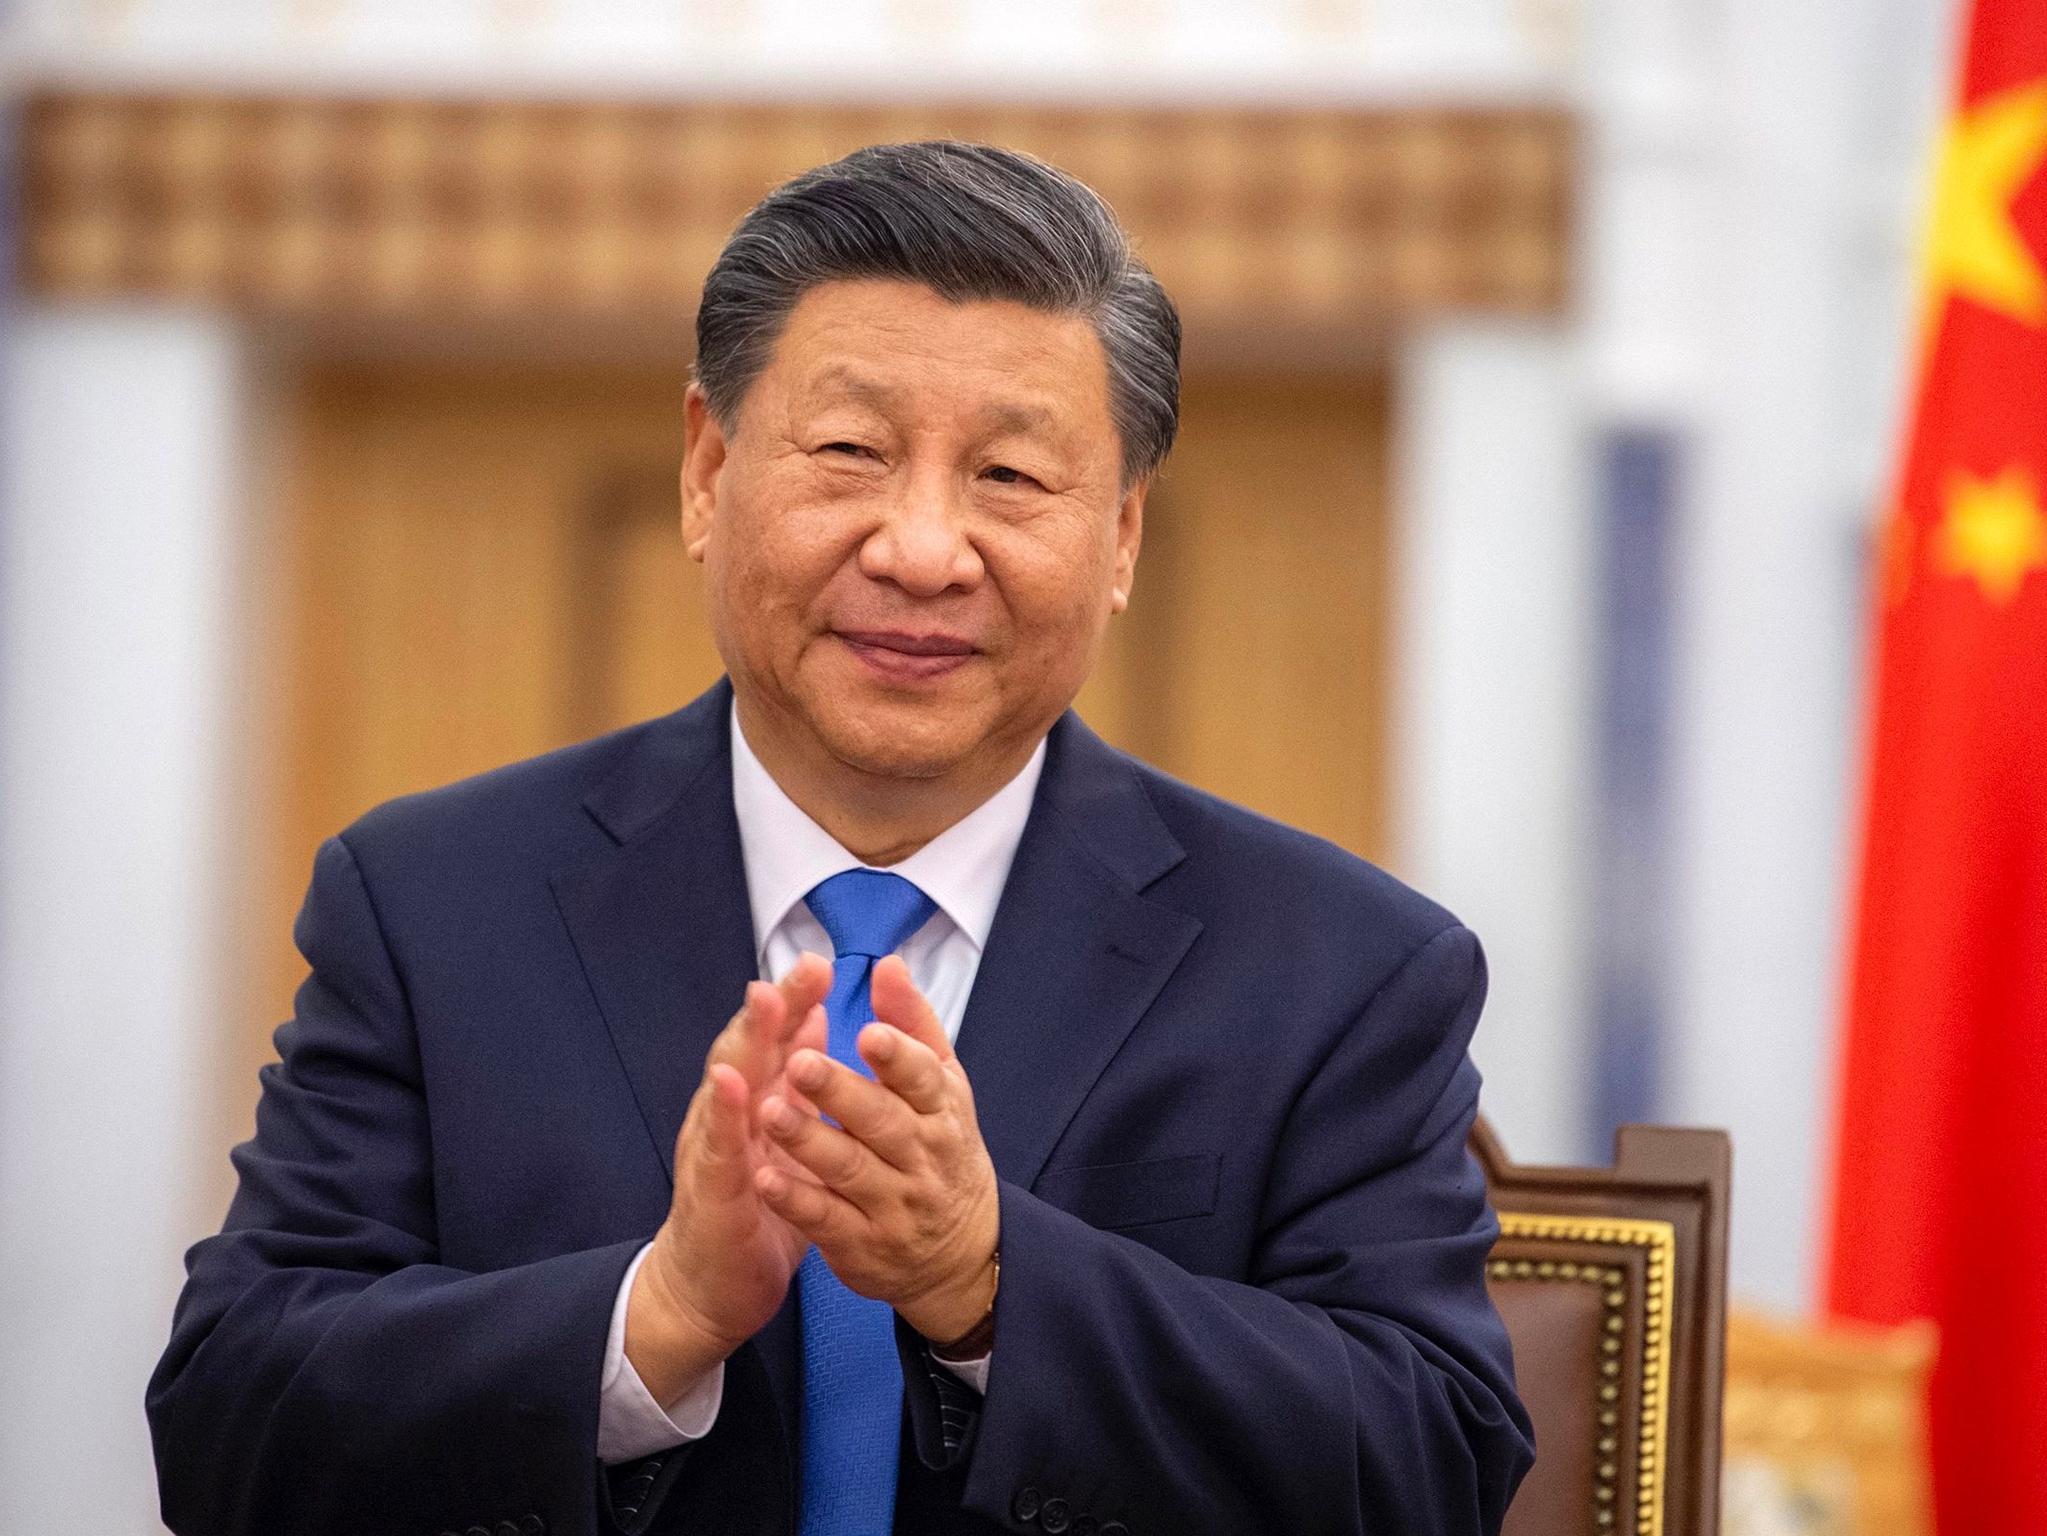 Just how powerful is Xi Jinping?